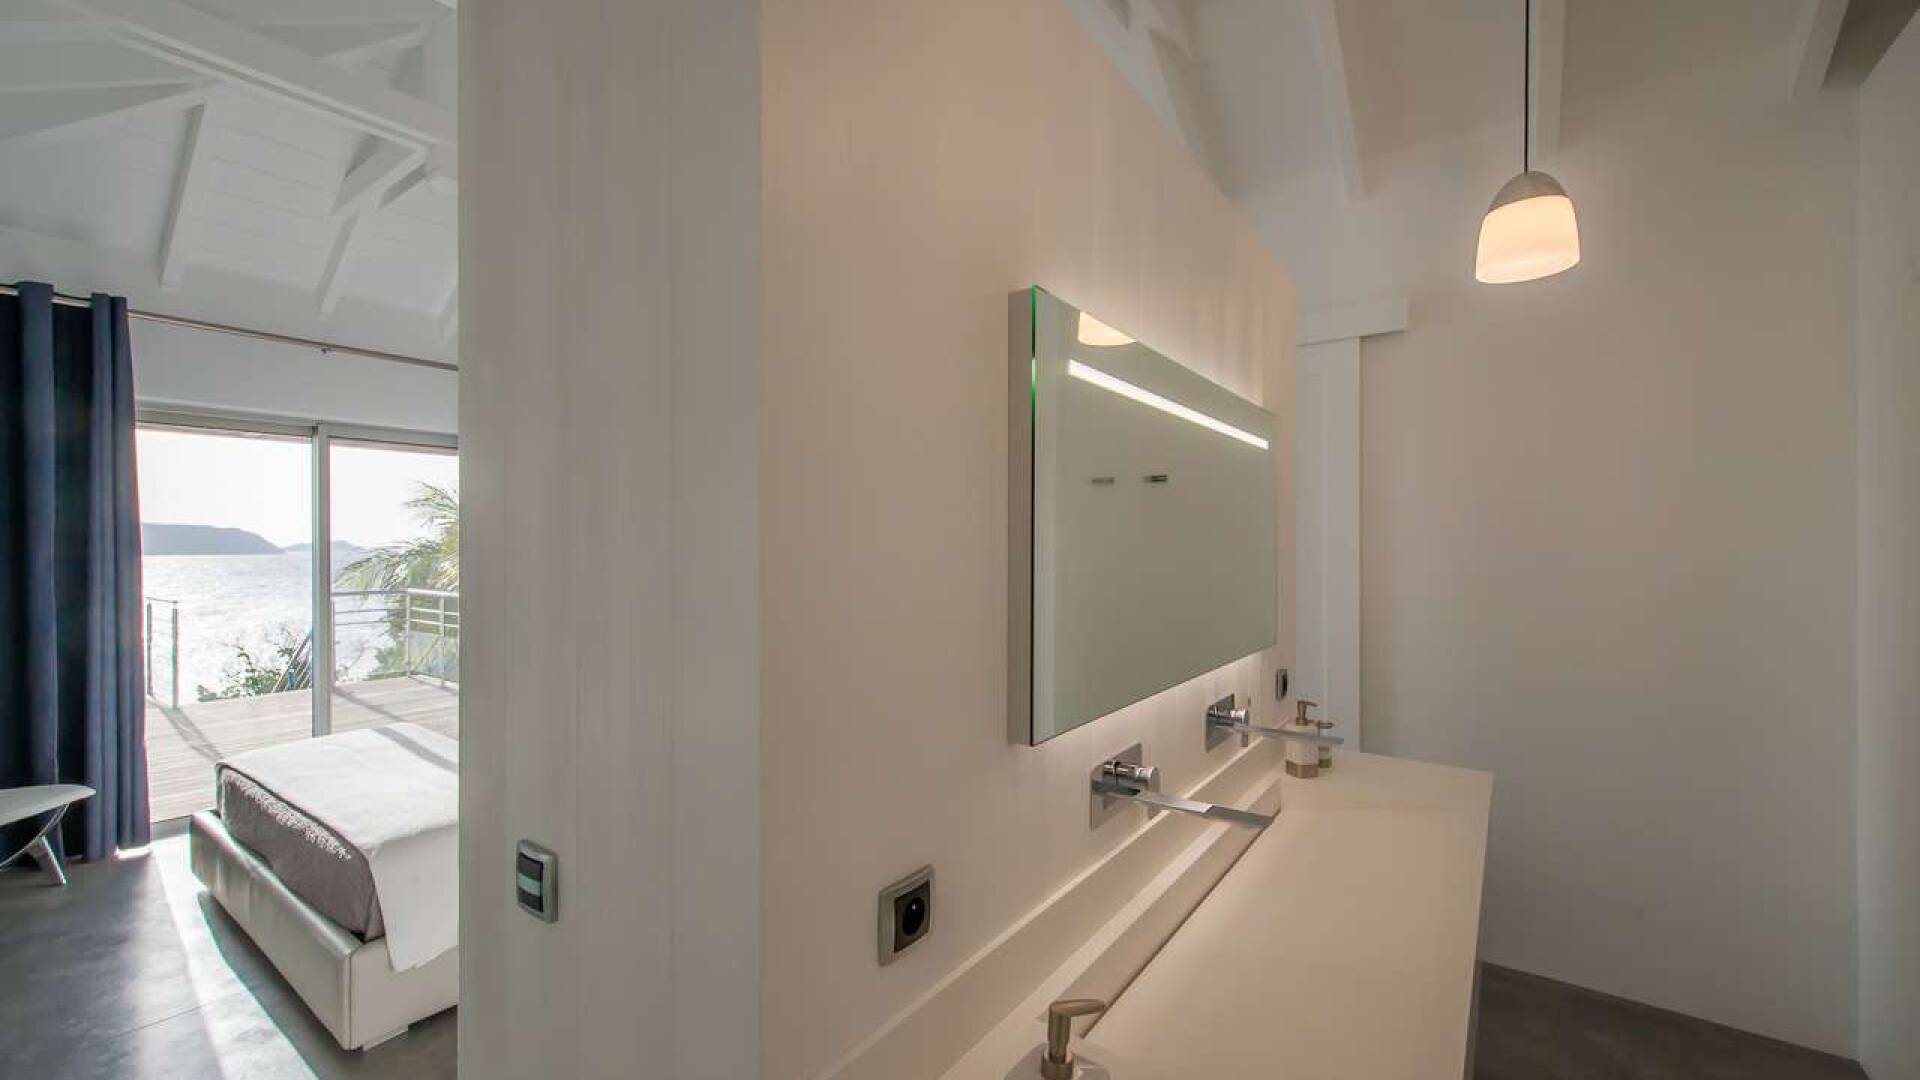 Bathroom at WV VPM, Pointe Milou, St. Barthelemy